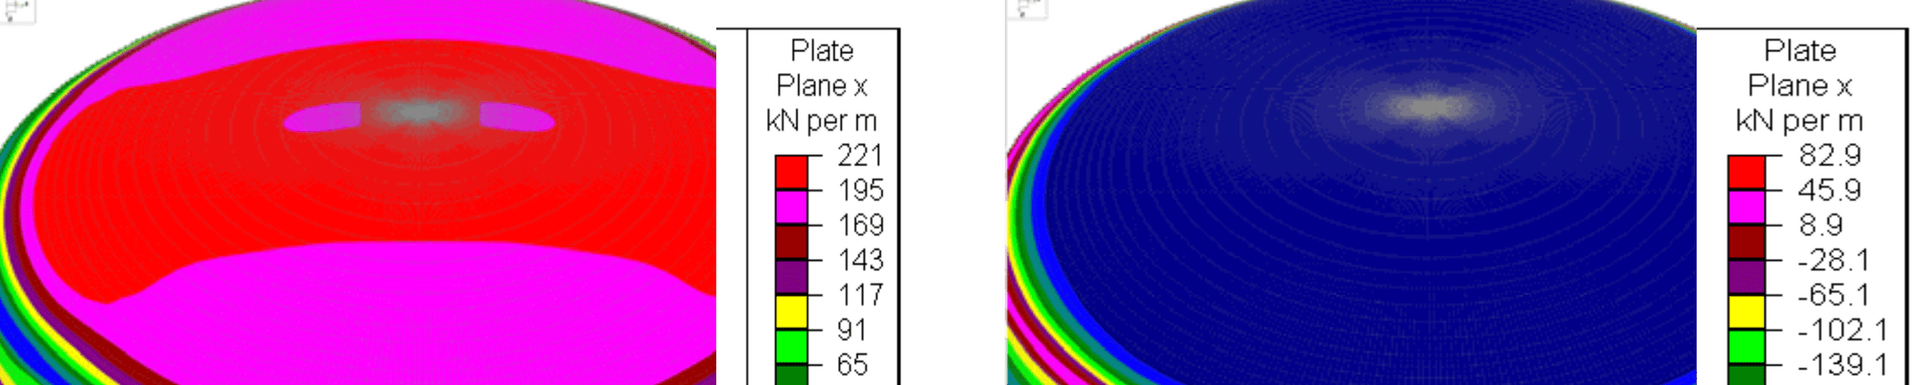 Extreme wind load analysis of Monolithic Domes.